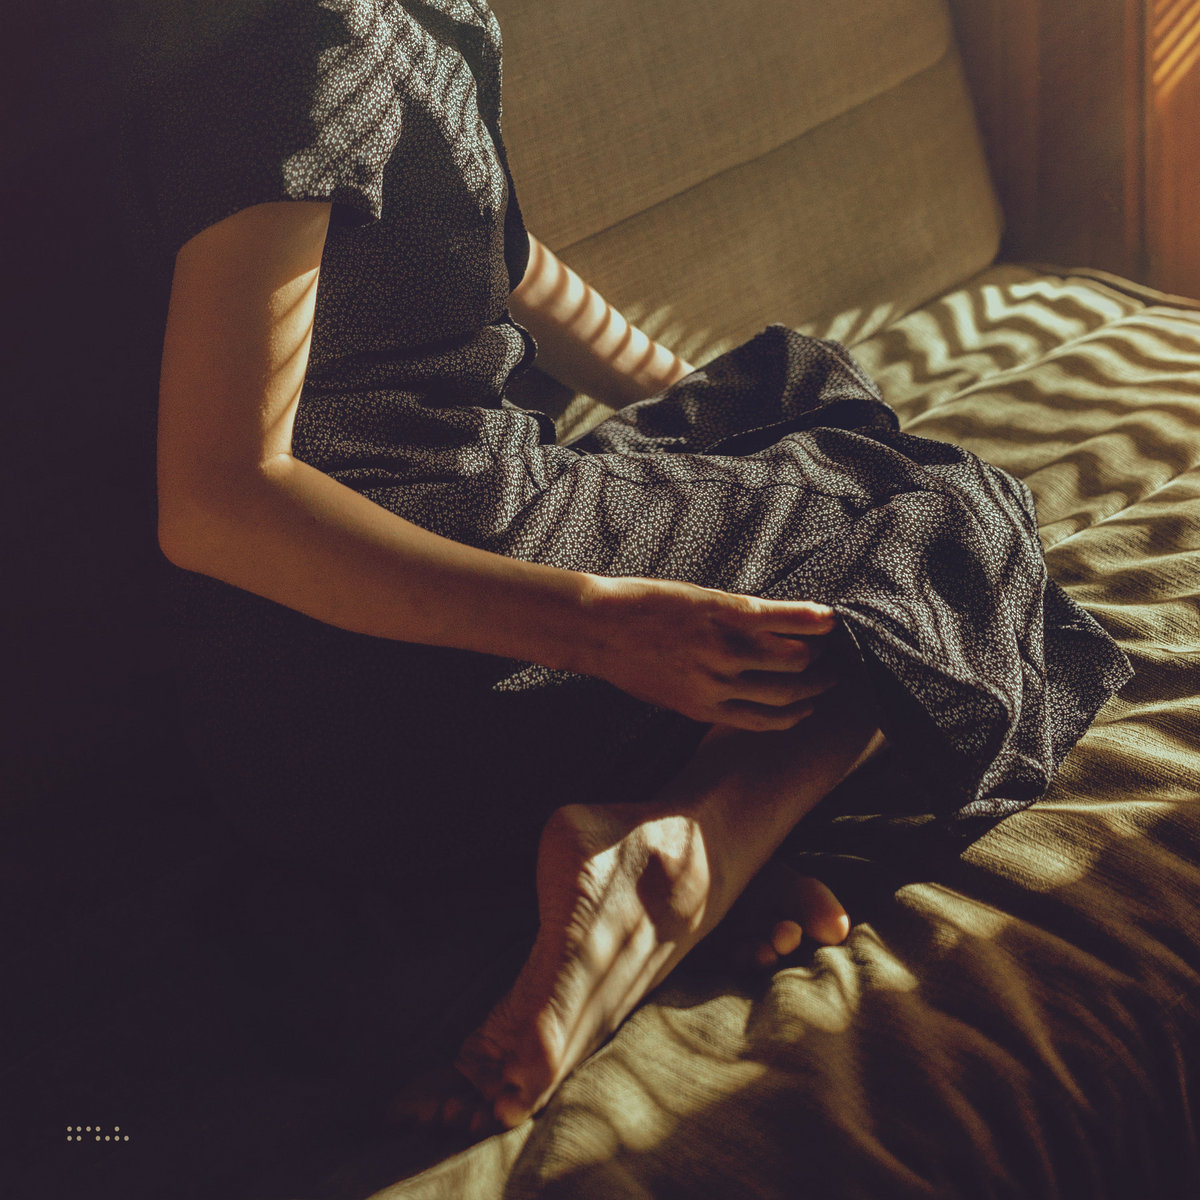 Weather by Tycho